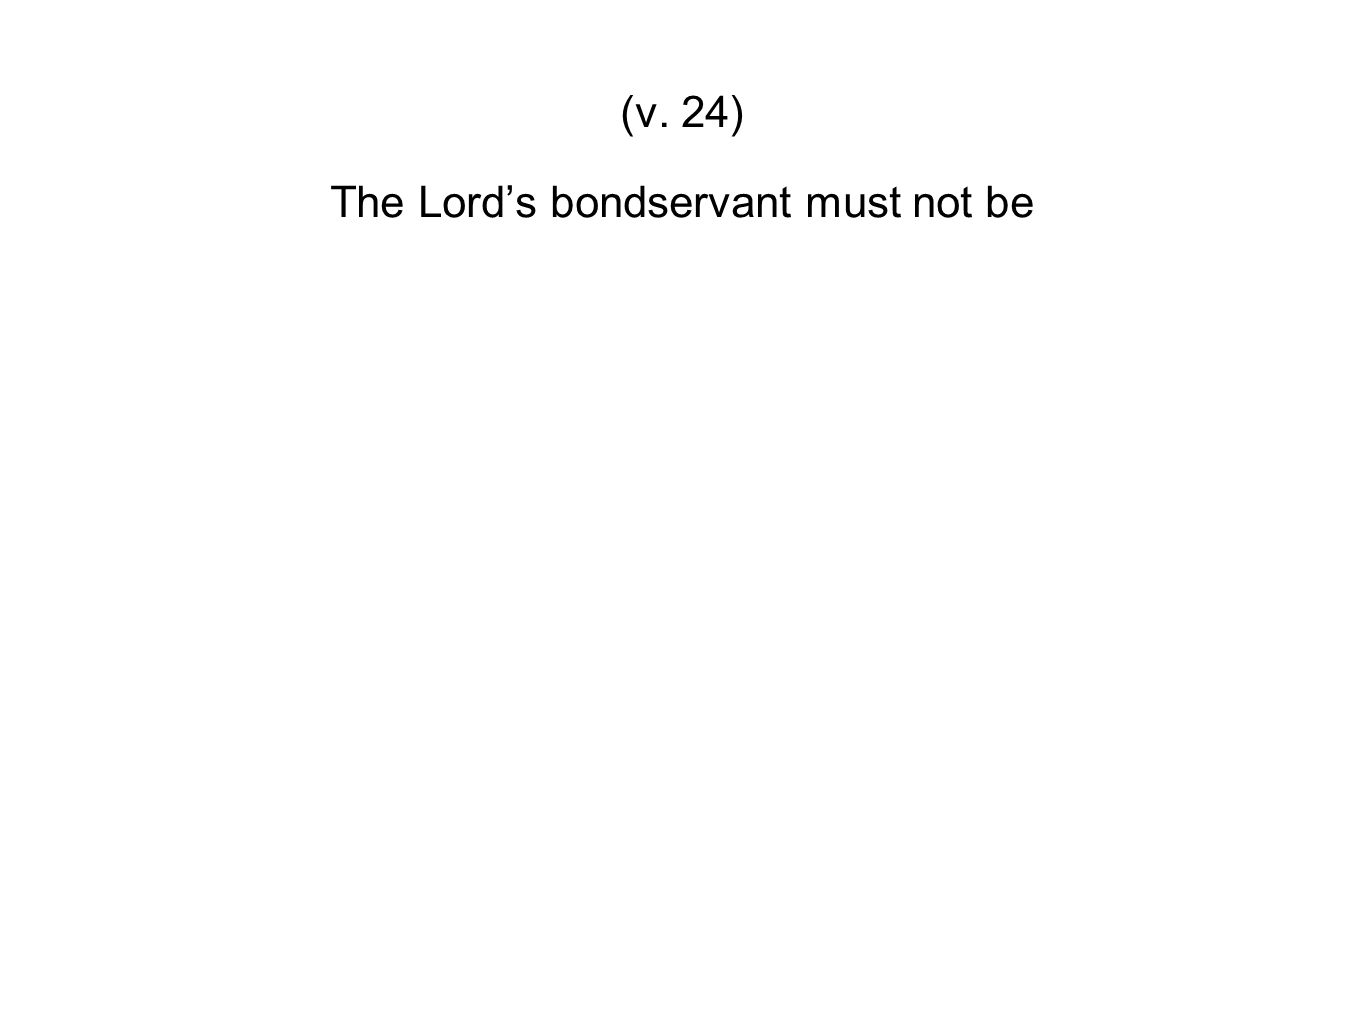 The Lord’s bondservant must not be